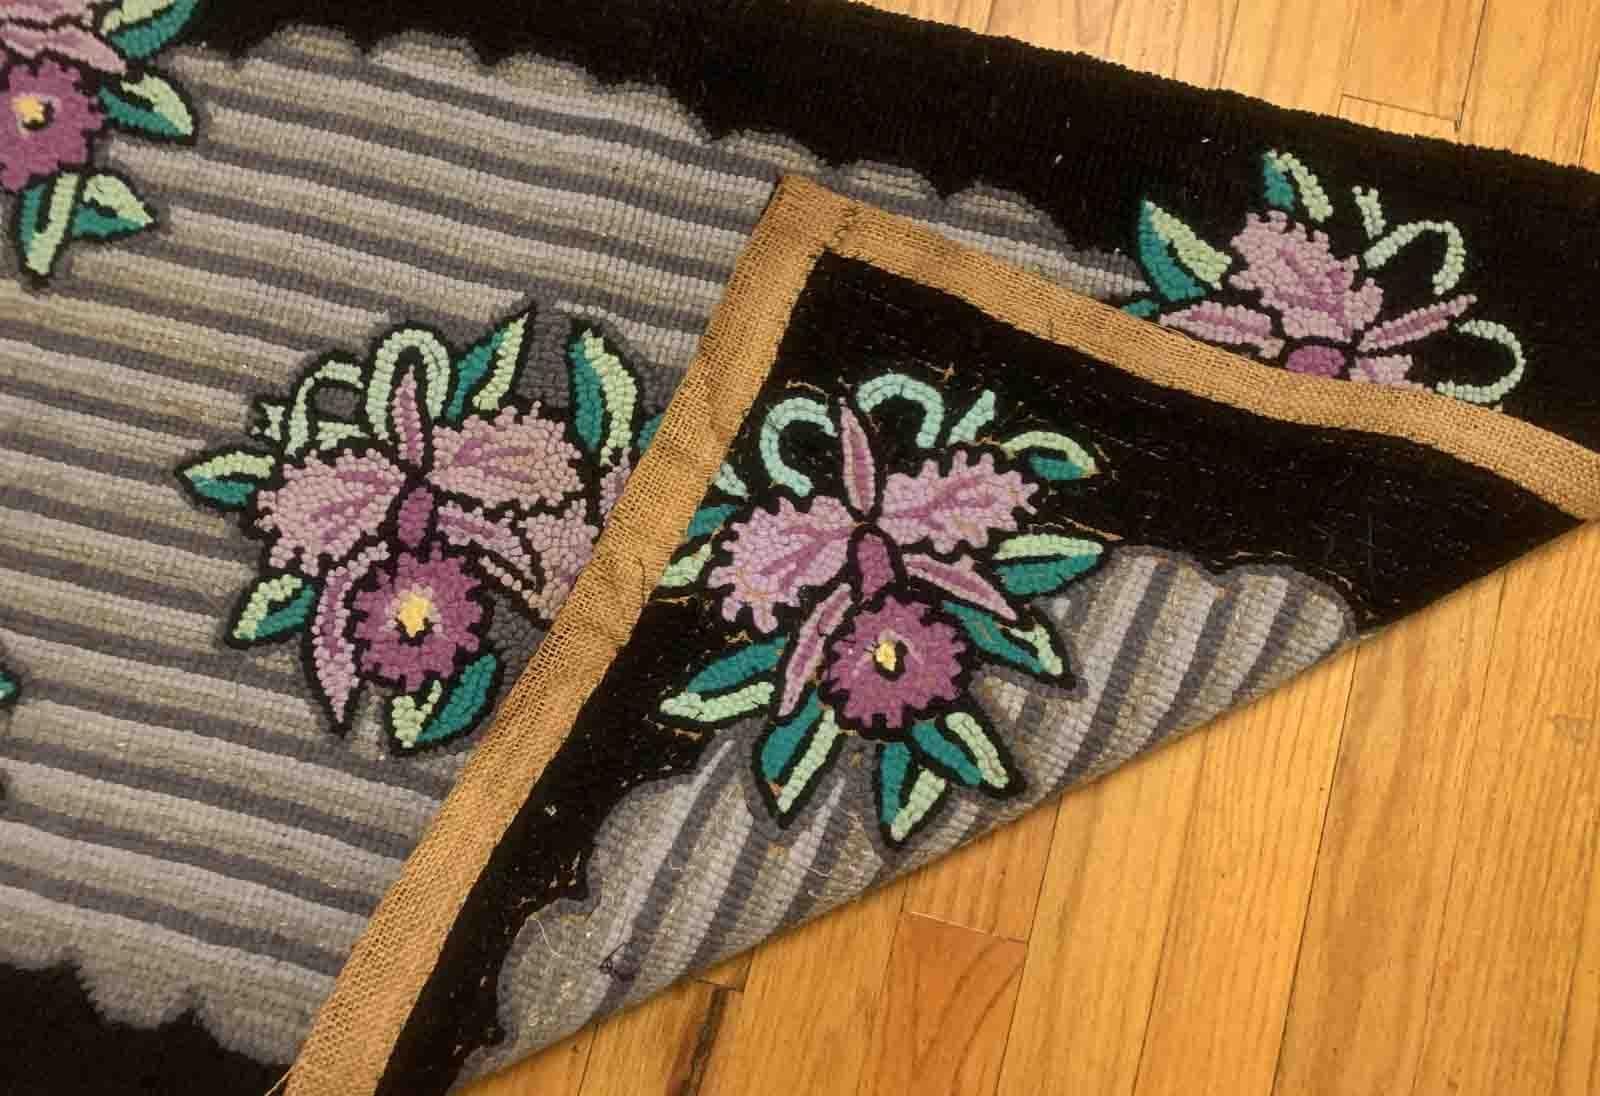 Handmade antique American Hooked rug in floral design. The rug is from the beginning of 20th century in good condition. 

-condition: good,

-circa: 1910s,

-size: 1.11' x 3.1' (60cm x 94cm),
?
-material: wool,

-country of origin: